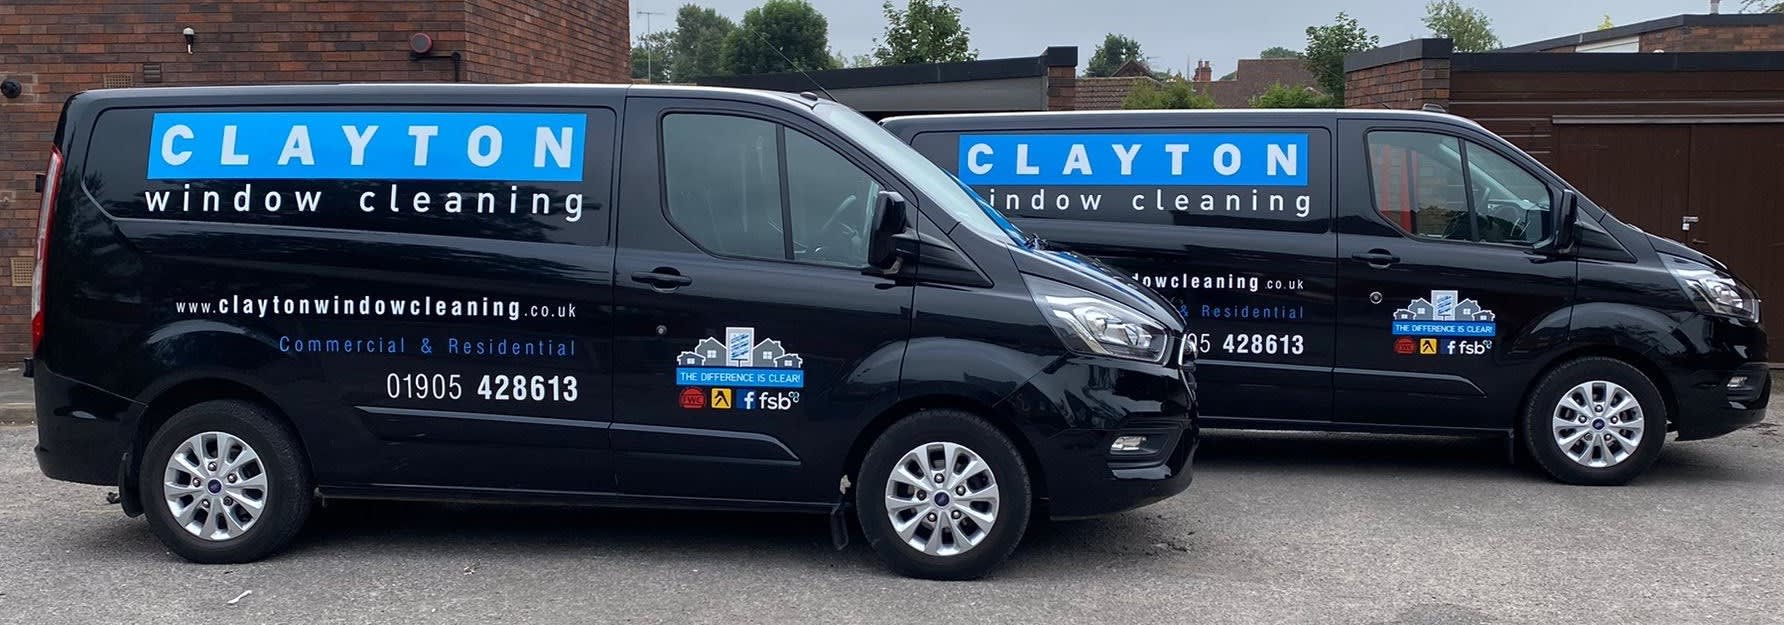 Images Clayton Window Cleaning